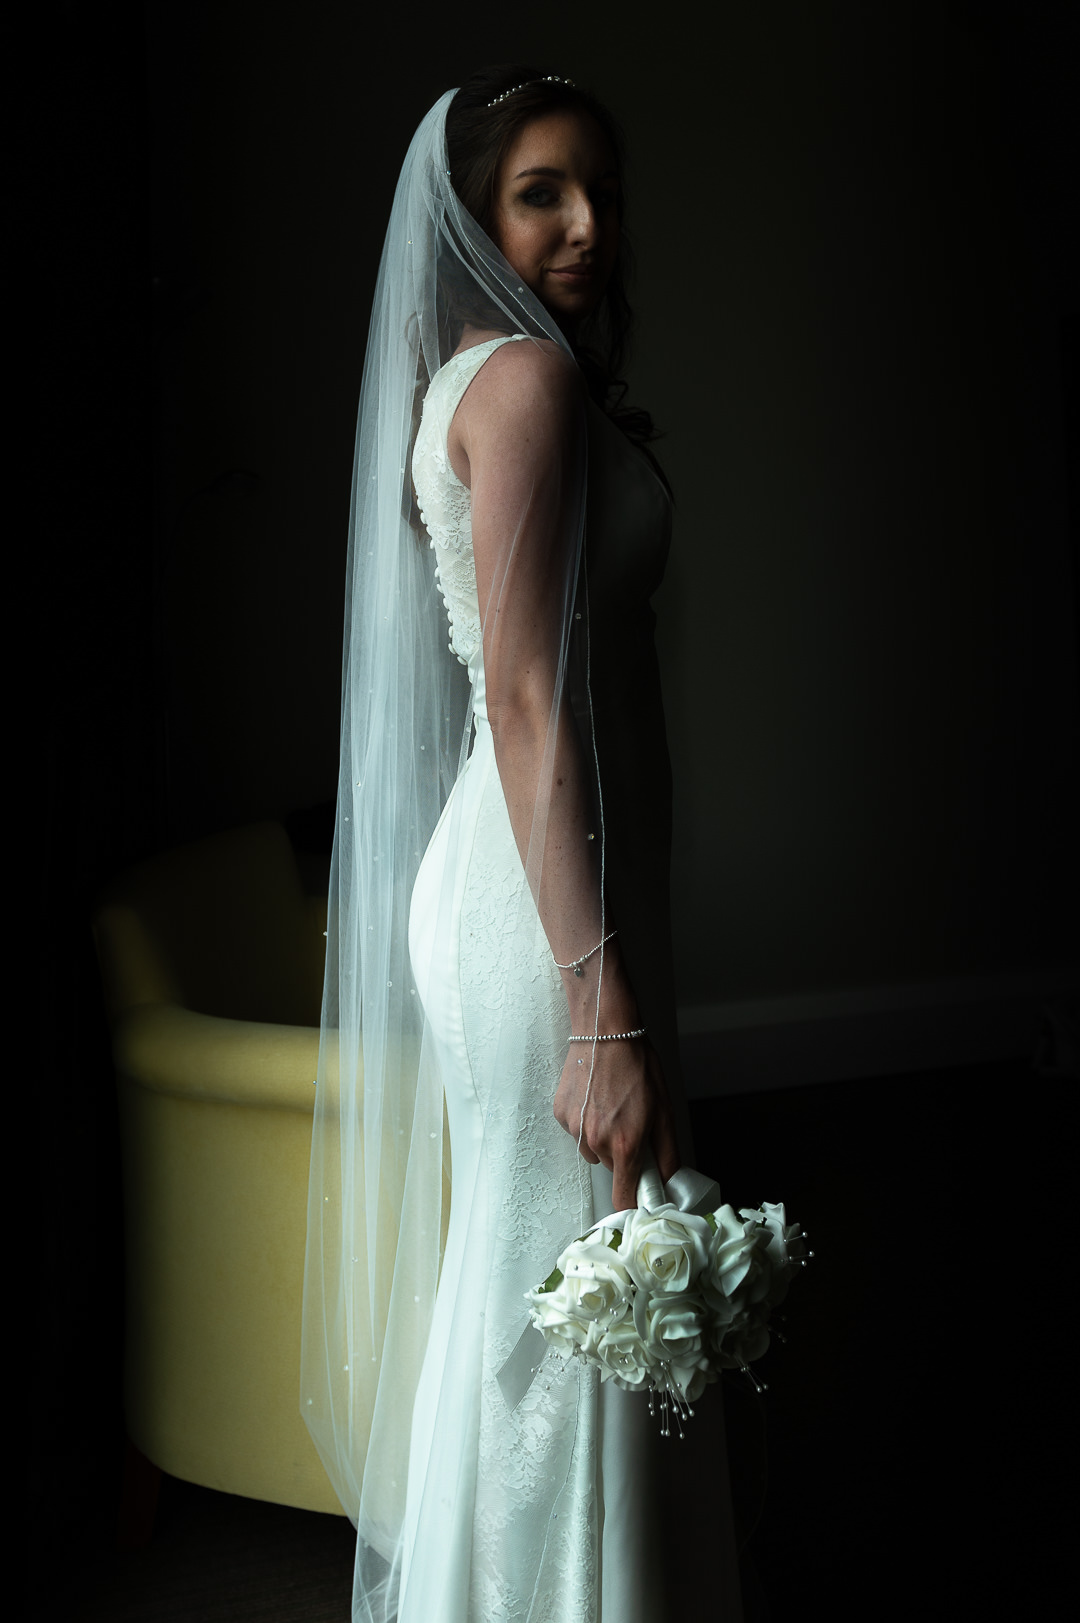 the bride stands with her back to the window light